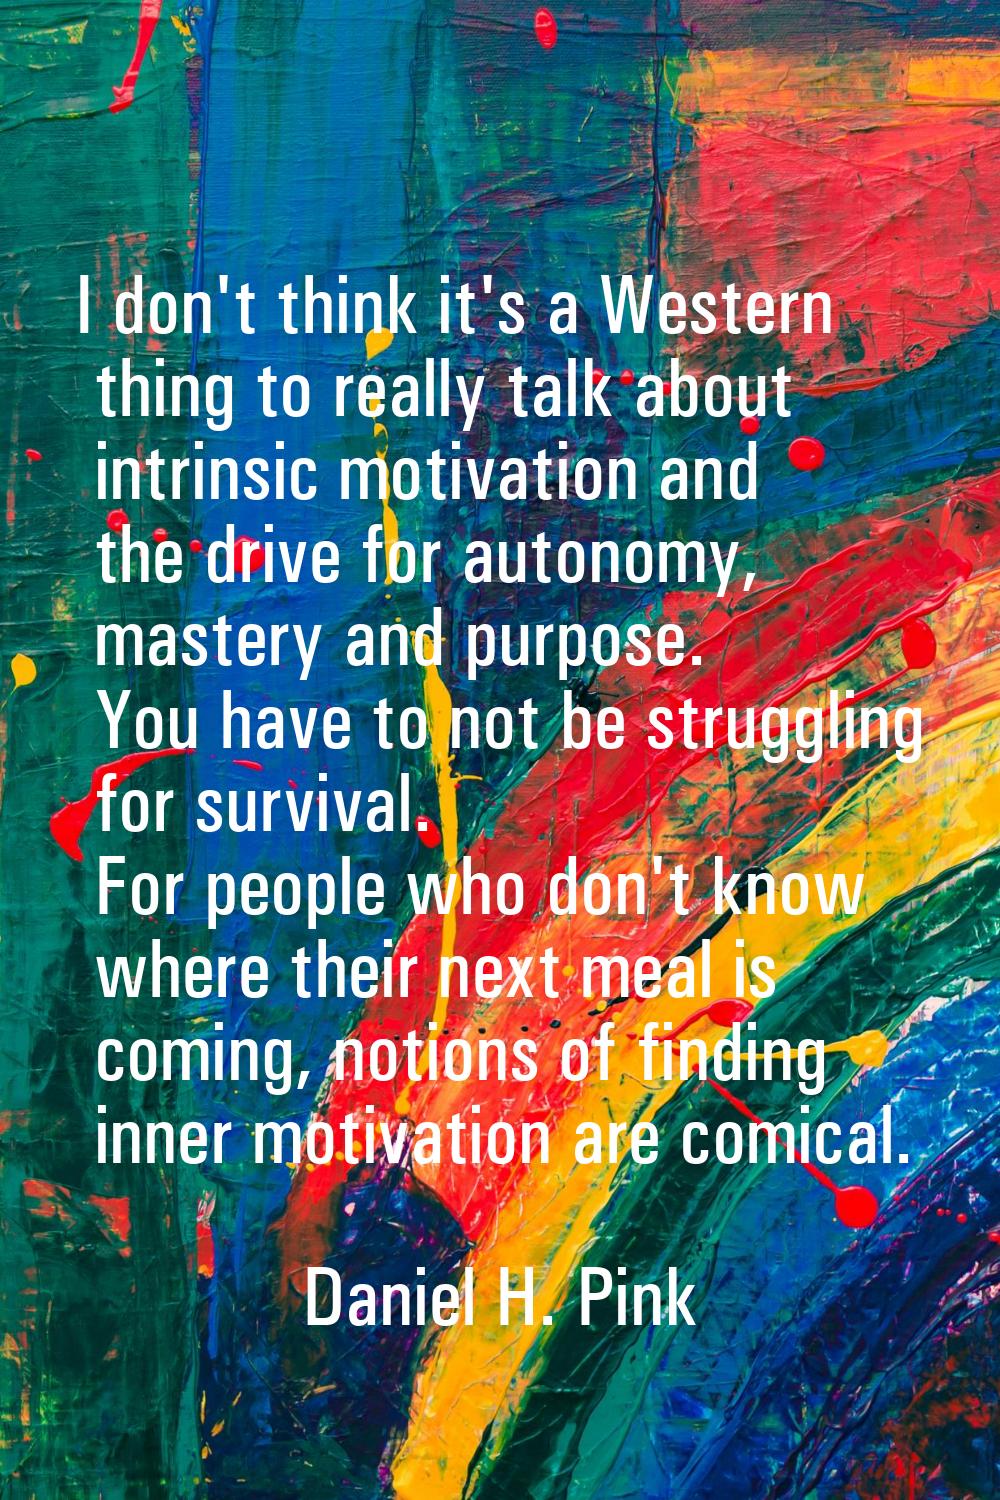 I don't think it's a Western thing to really talk about intrinsic motivation and the drive for auto